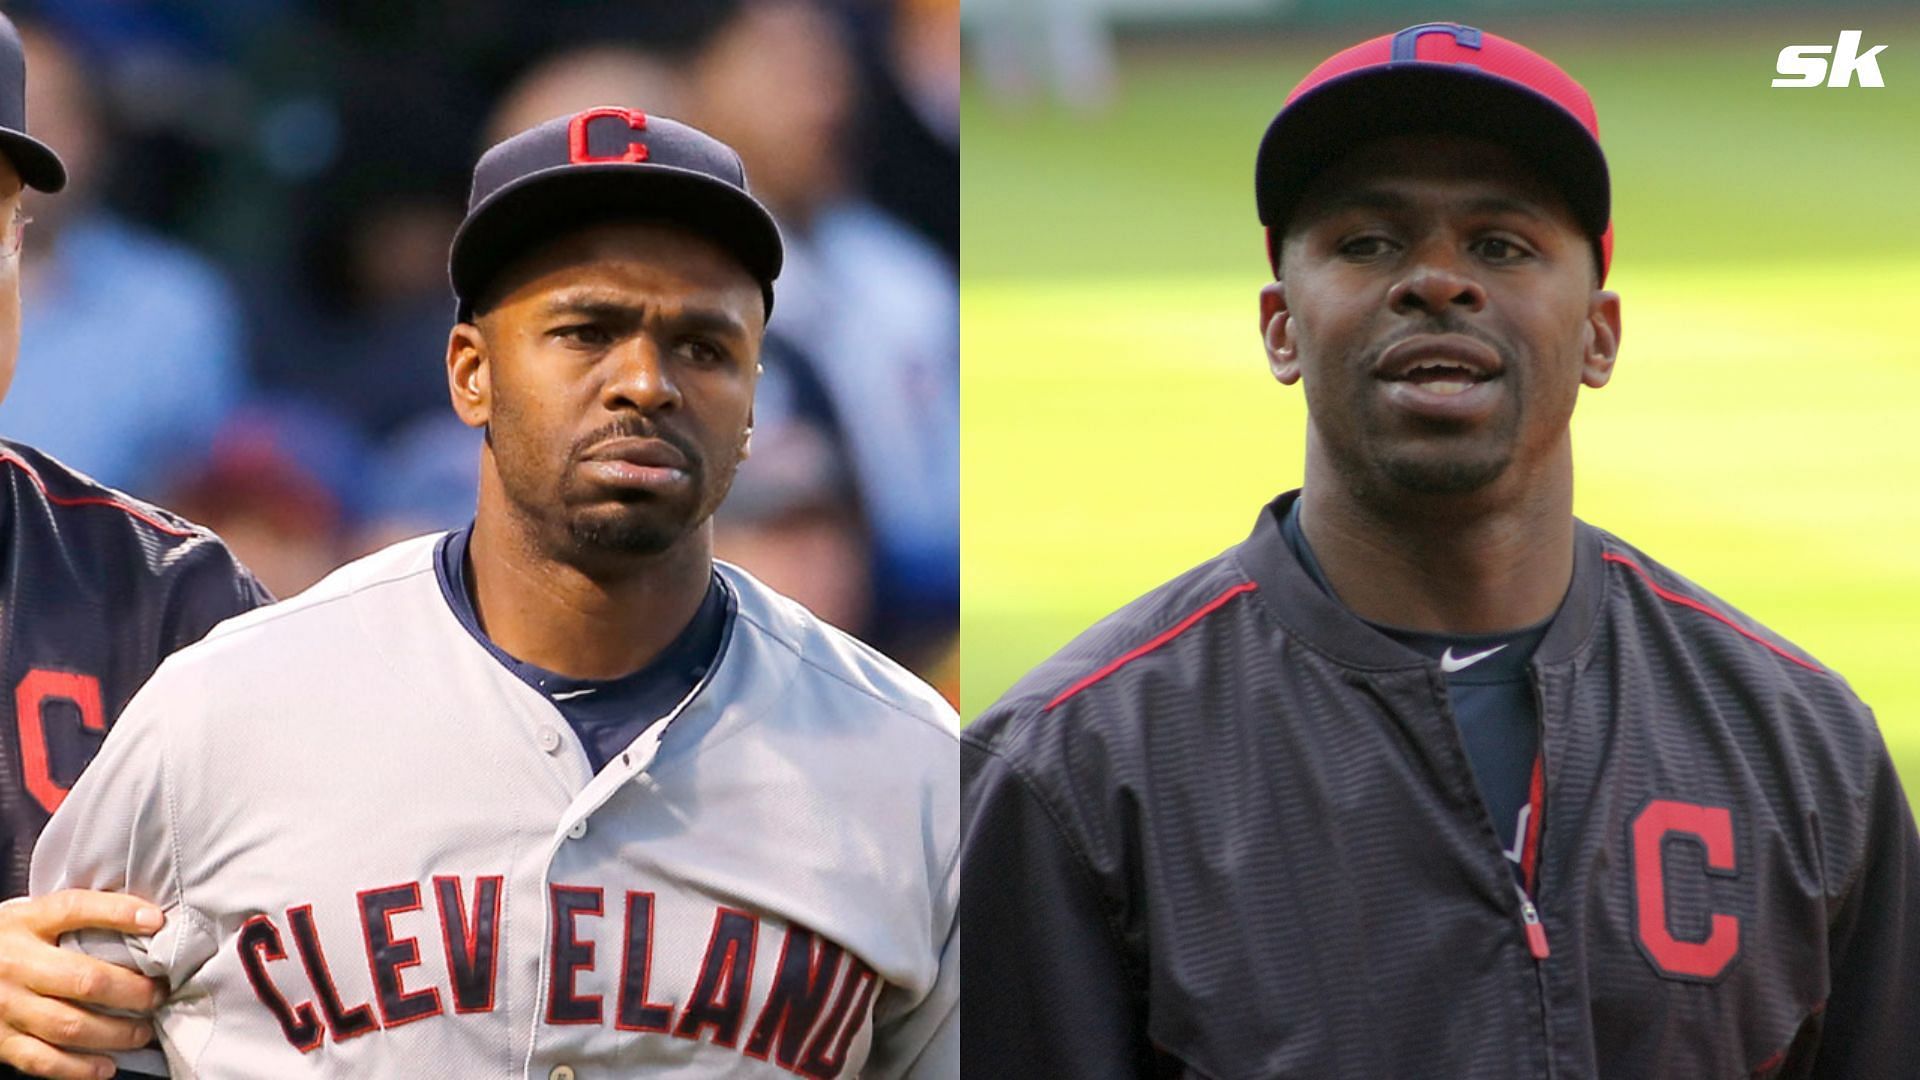 Former MLB CF Michael Bourn voices his opinion on stealing 100 bases with current regulations